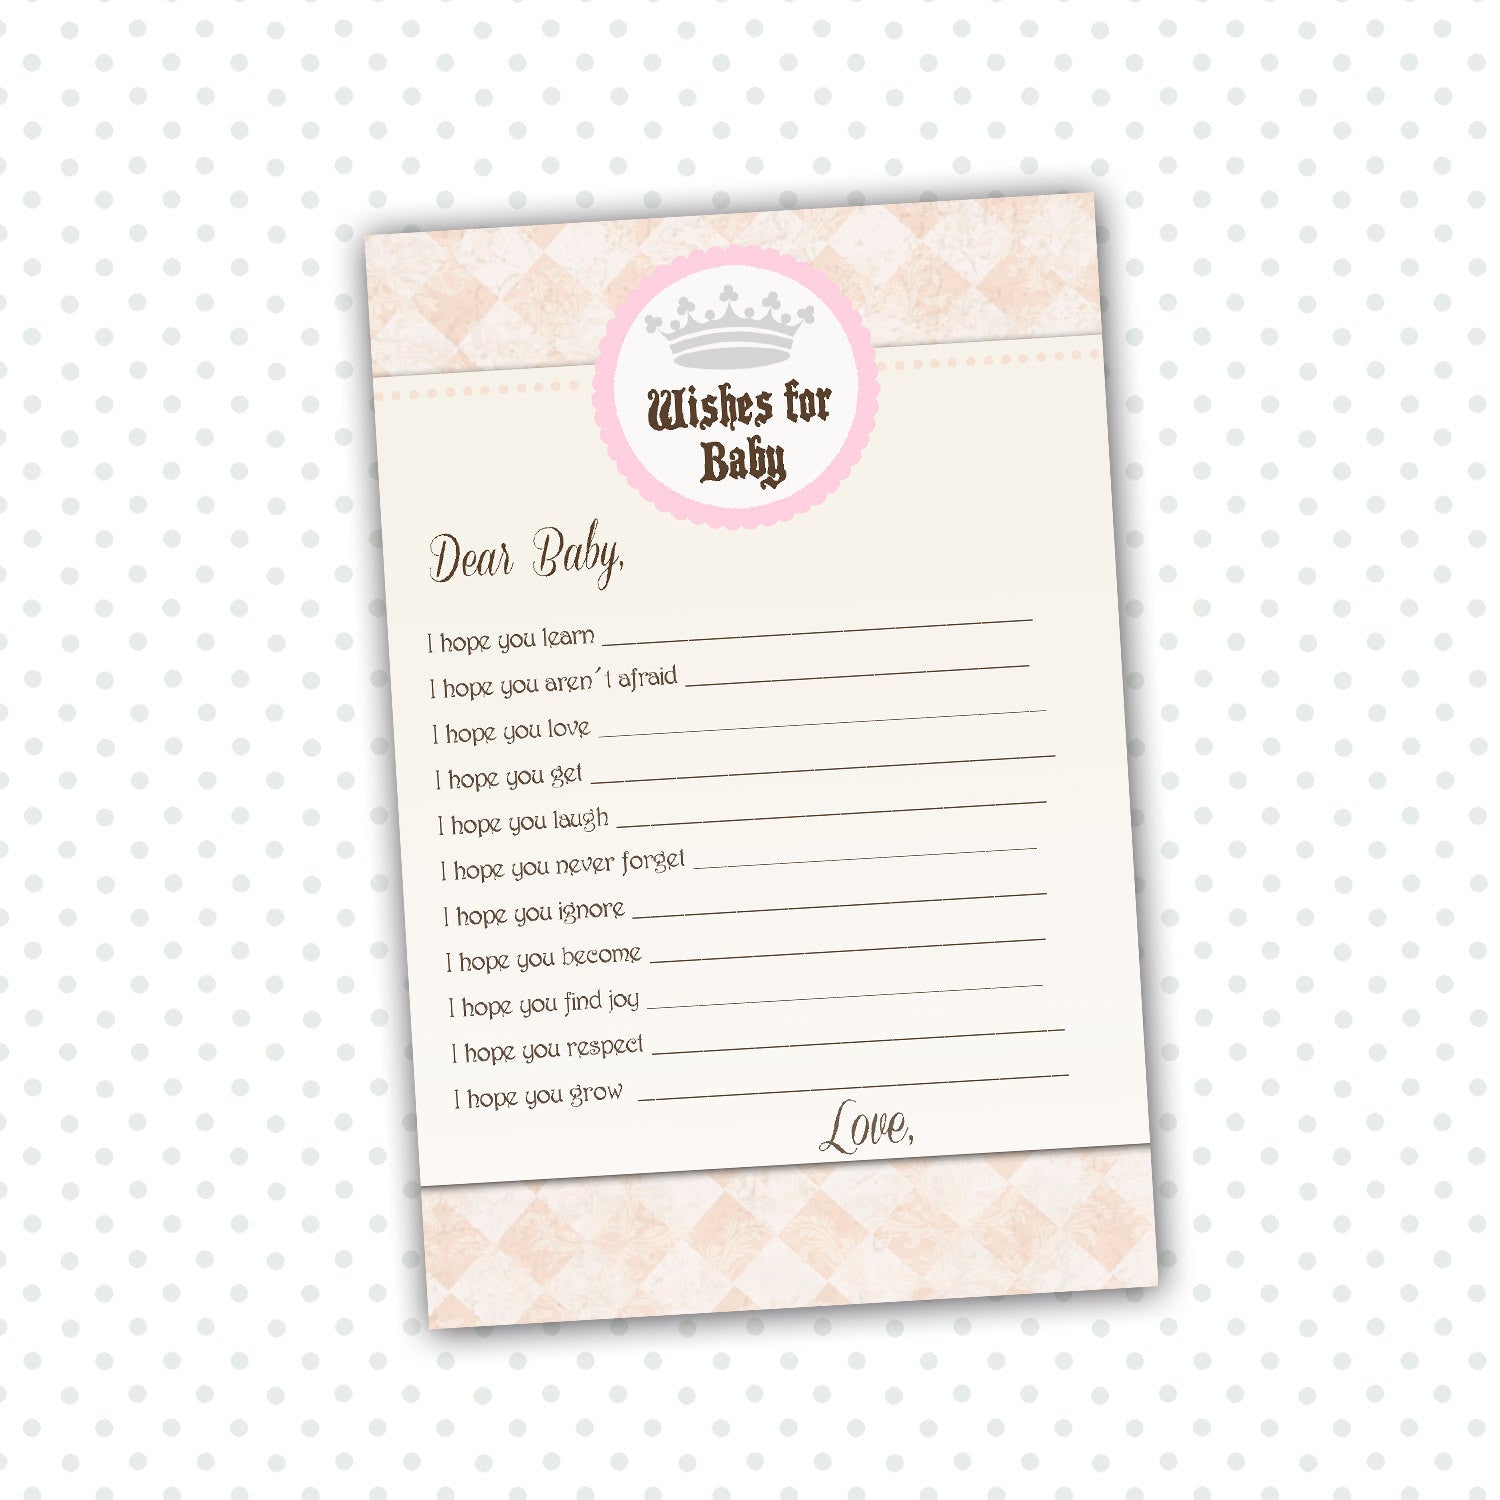 Free Printable Home Office Supplies List